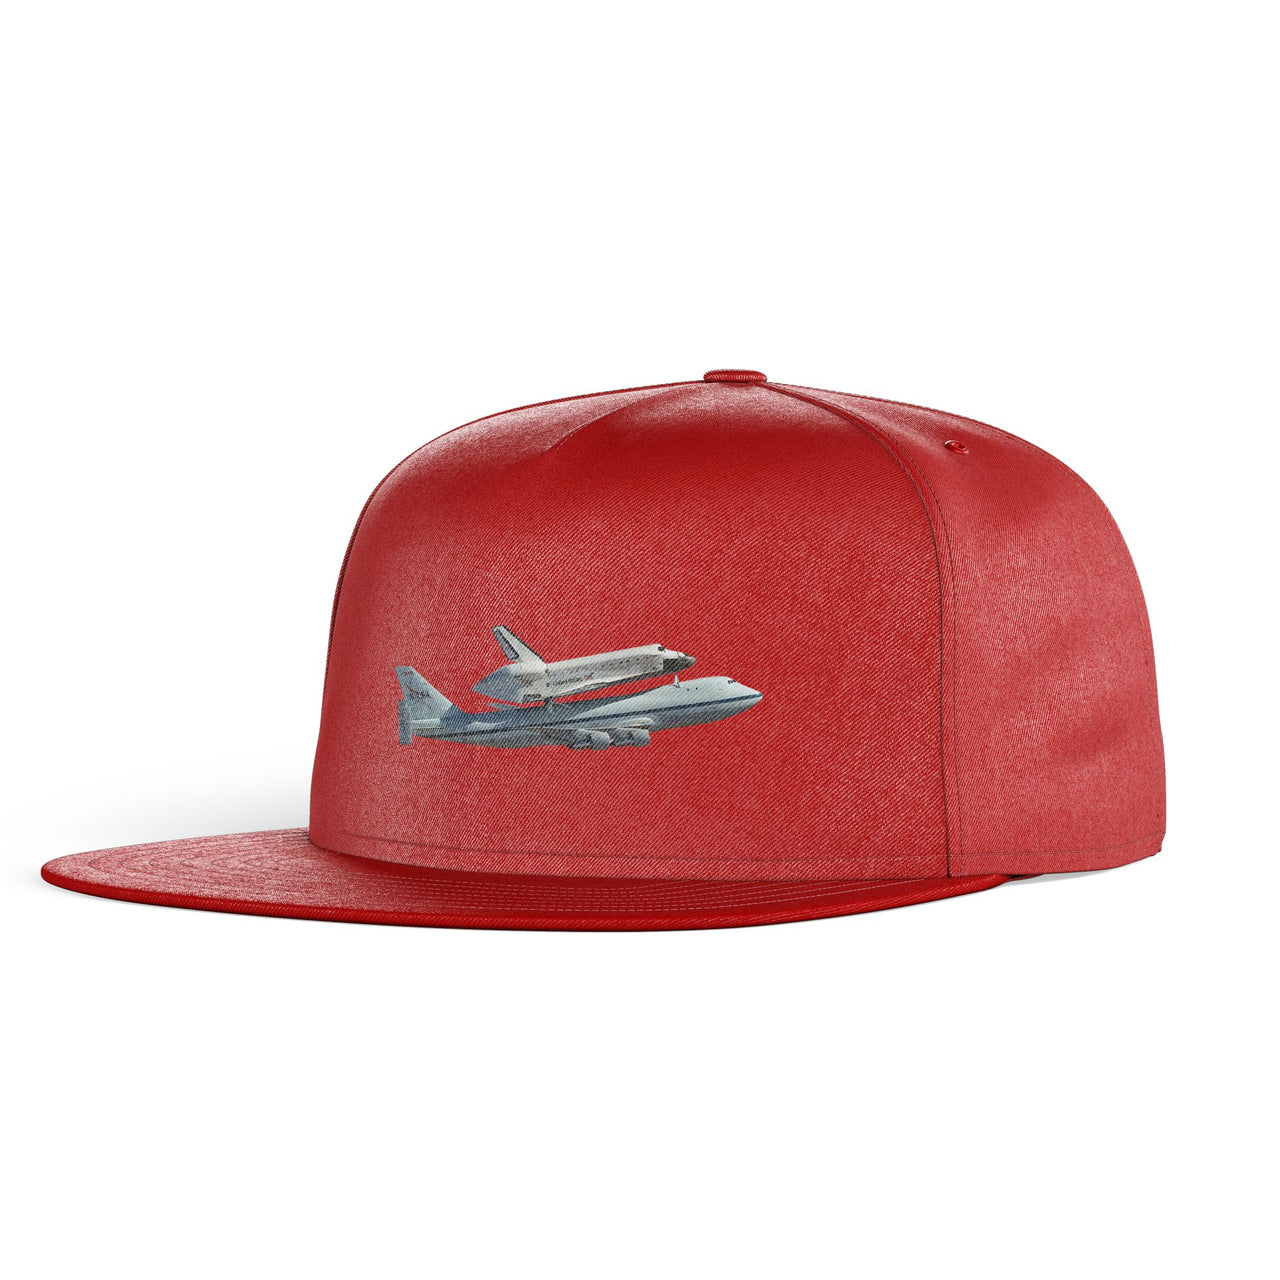 Space shuttle on 747 Designed Snapback Caps & Hats